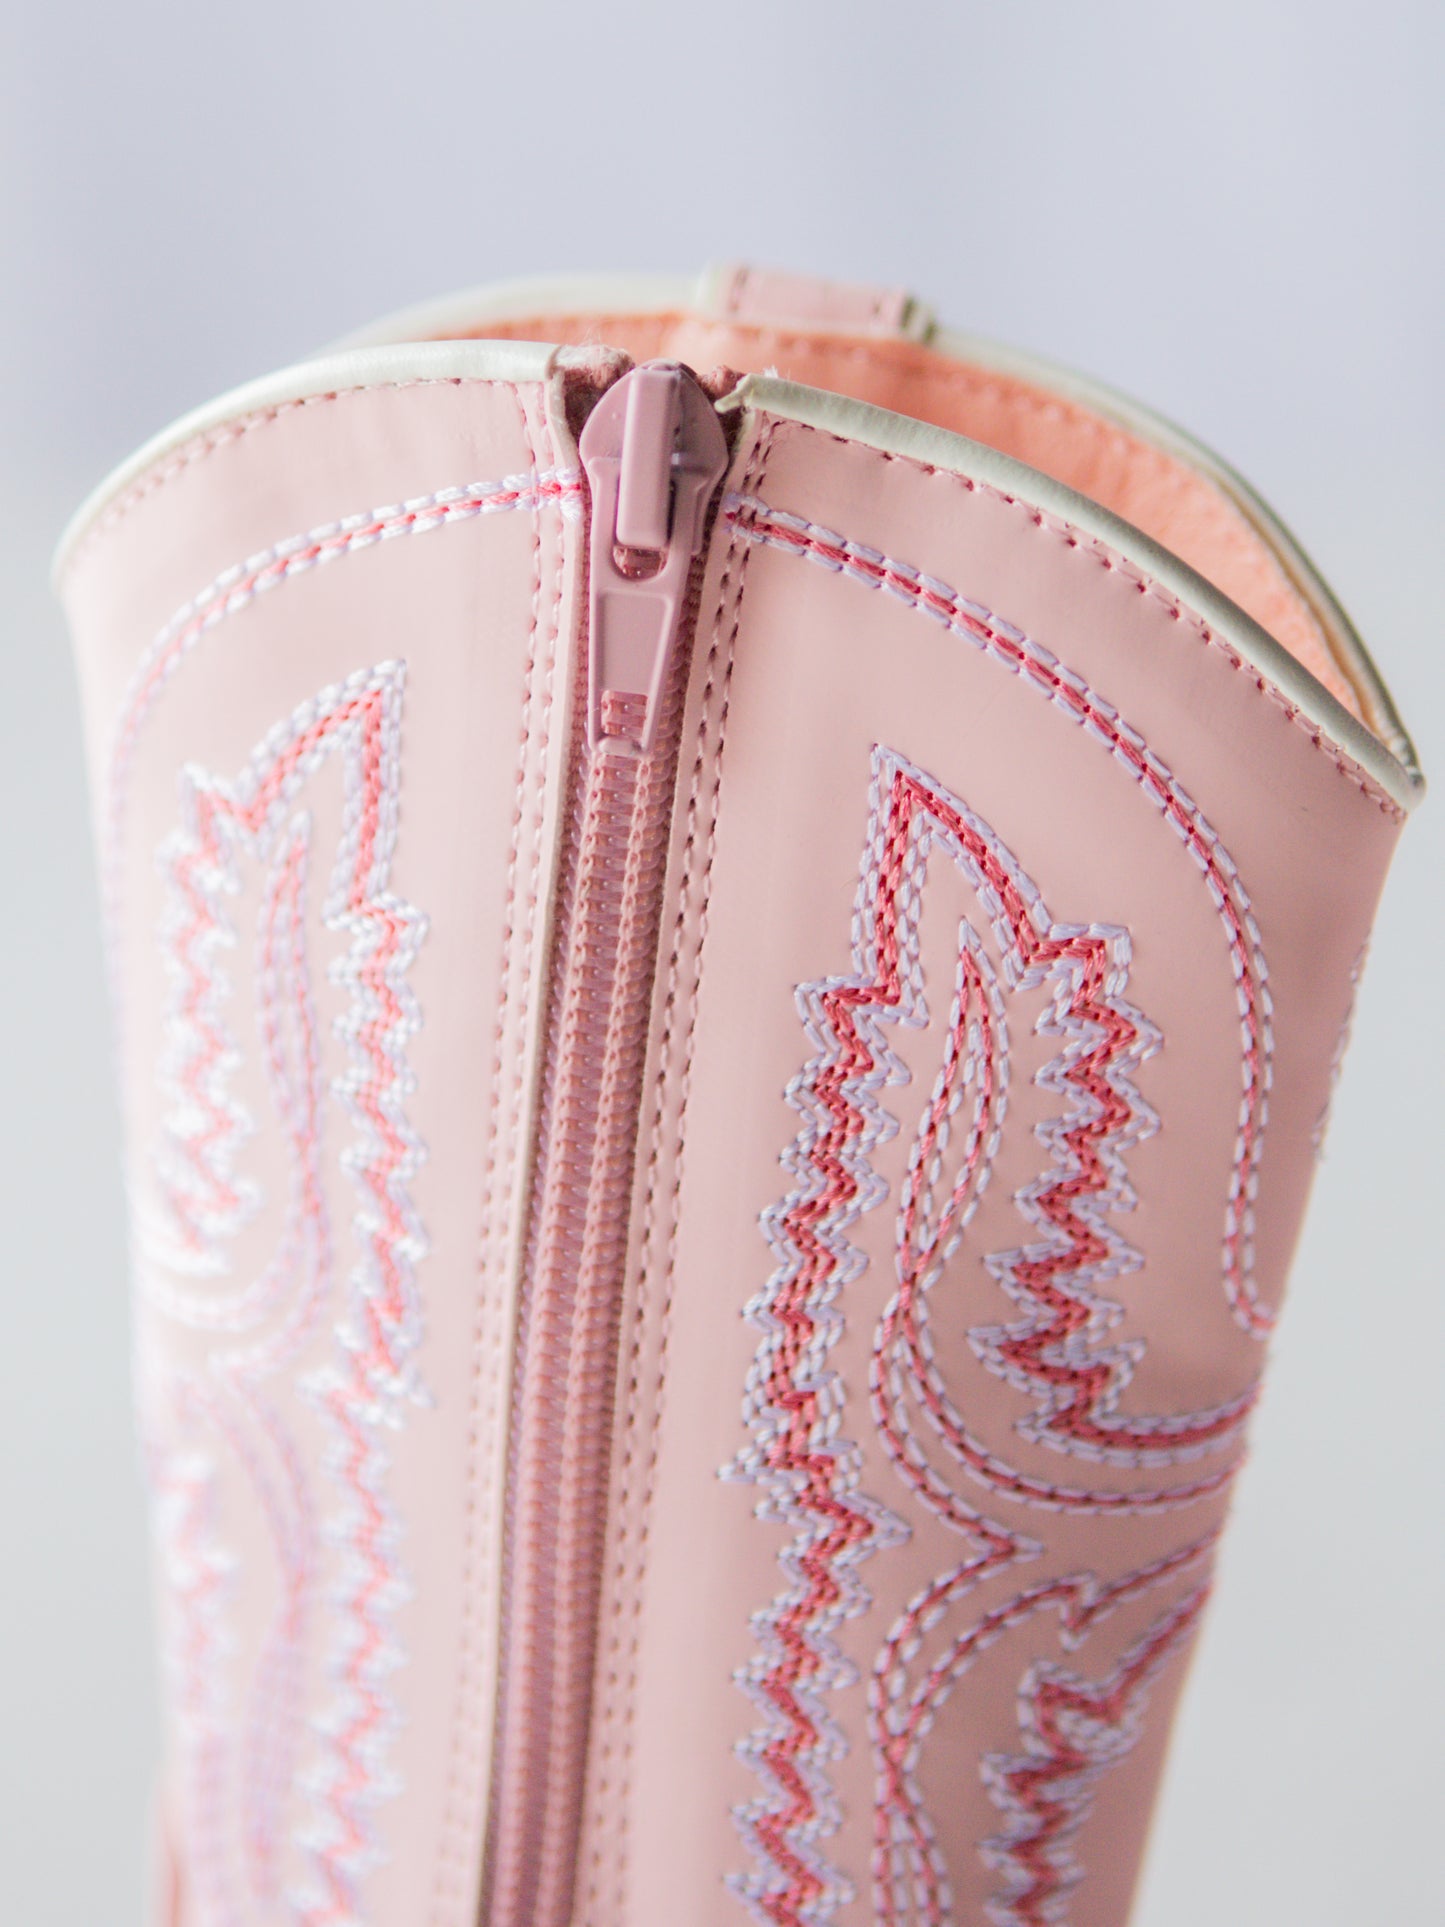 Tall Cowgirl Boots - Giddy Up Pink